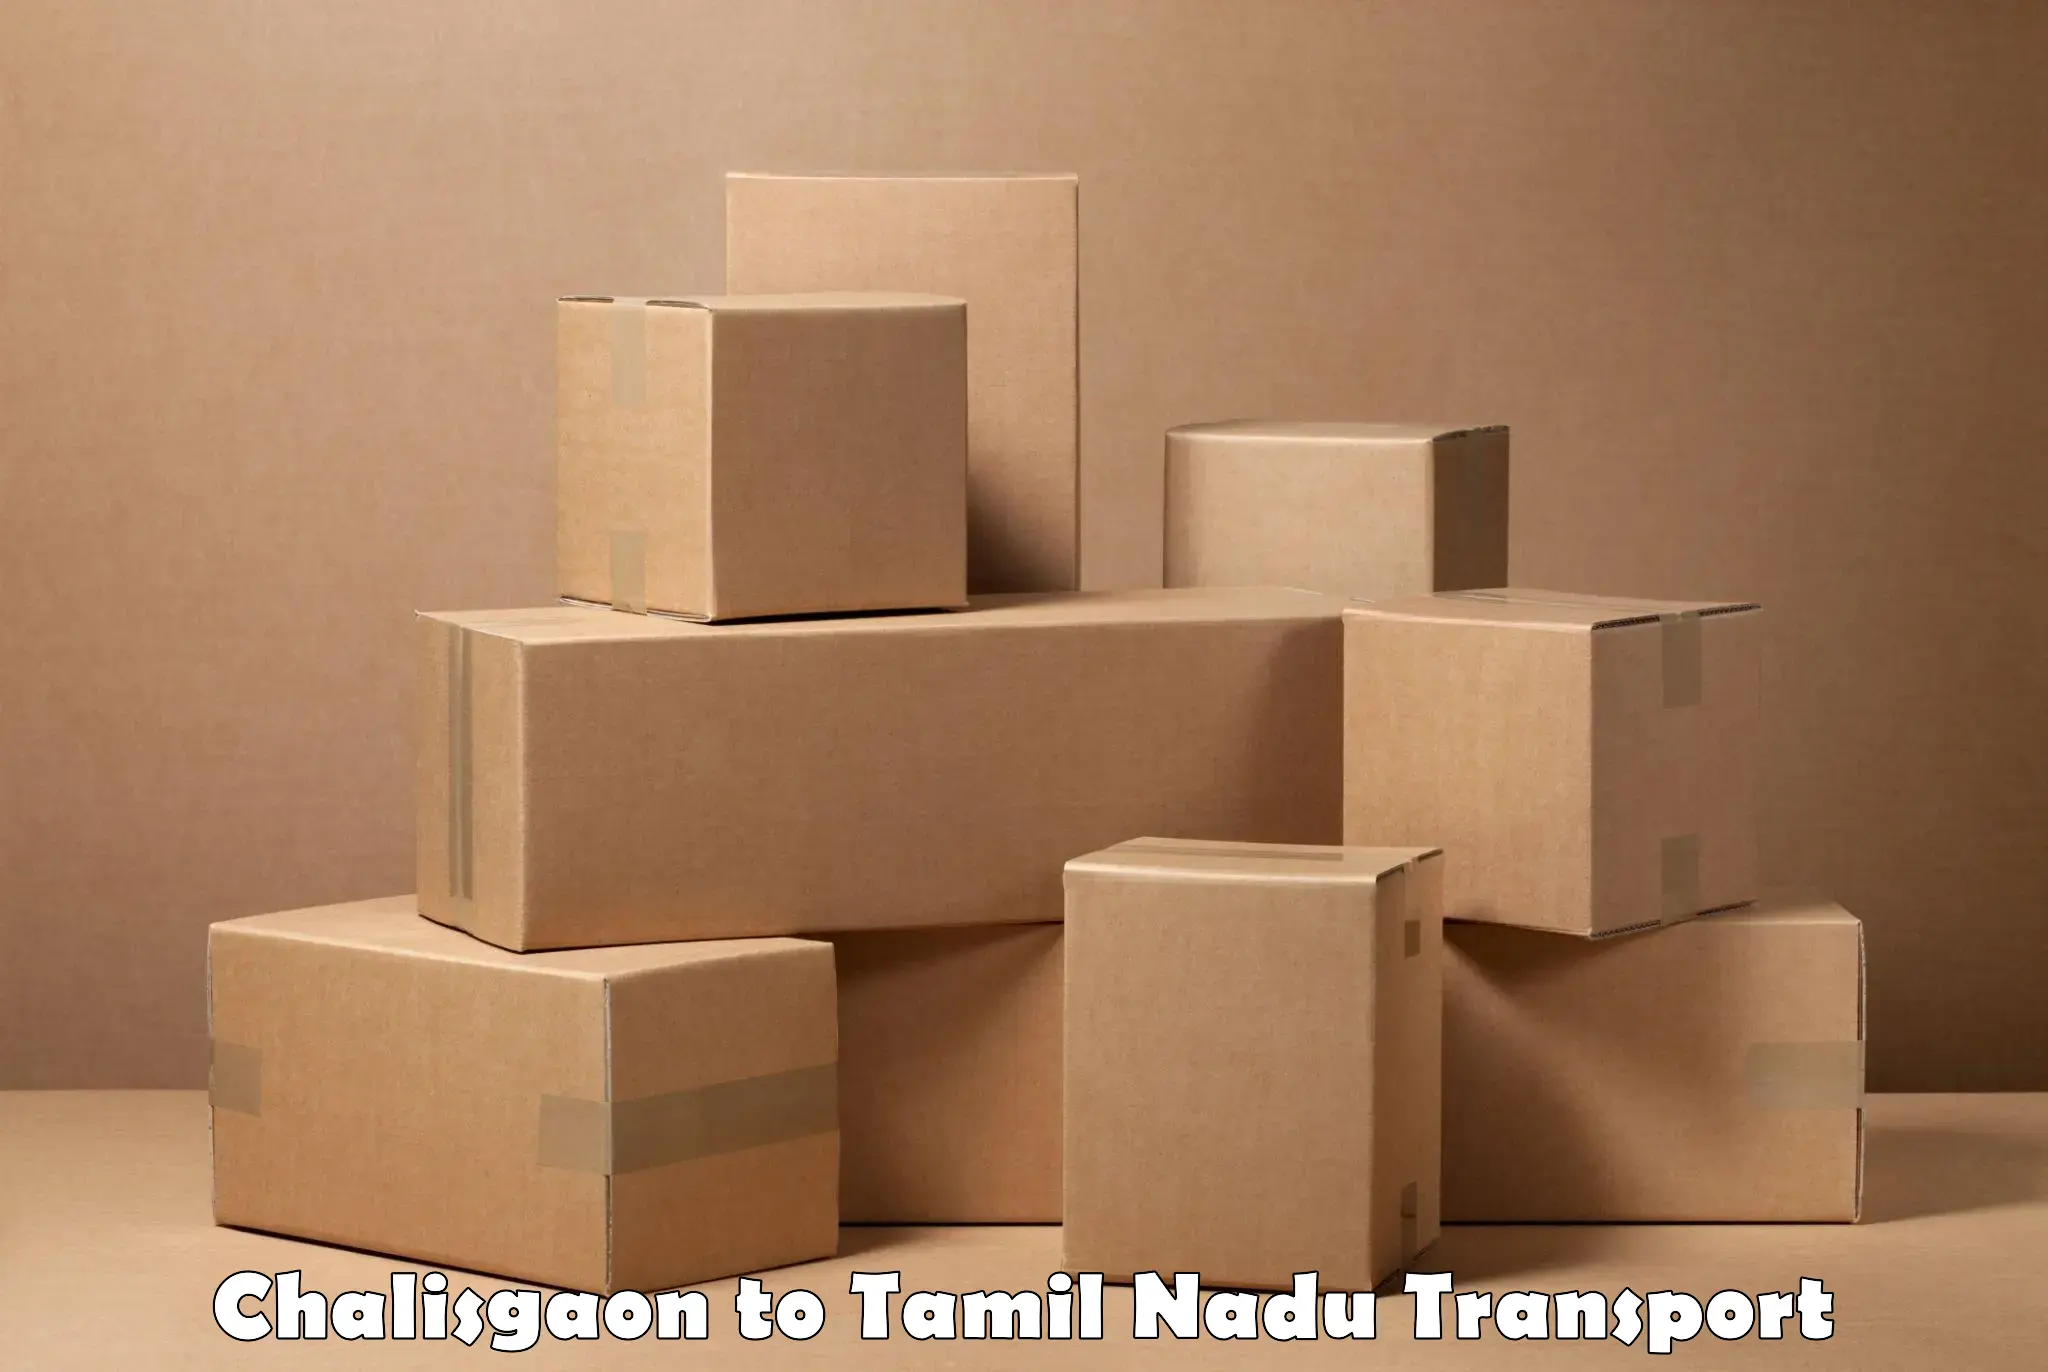 Truck transport companies in India in Chalisgaon to Cuddalore